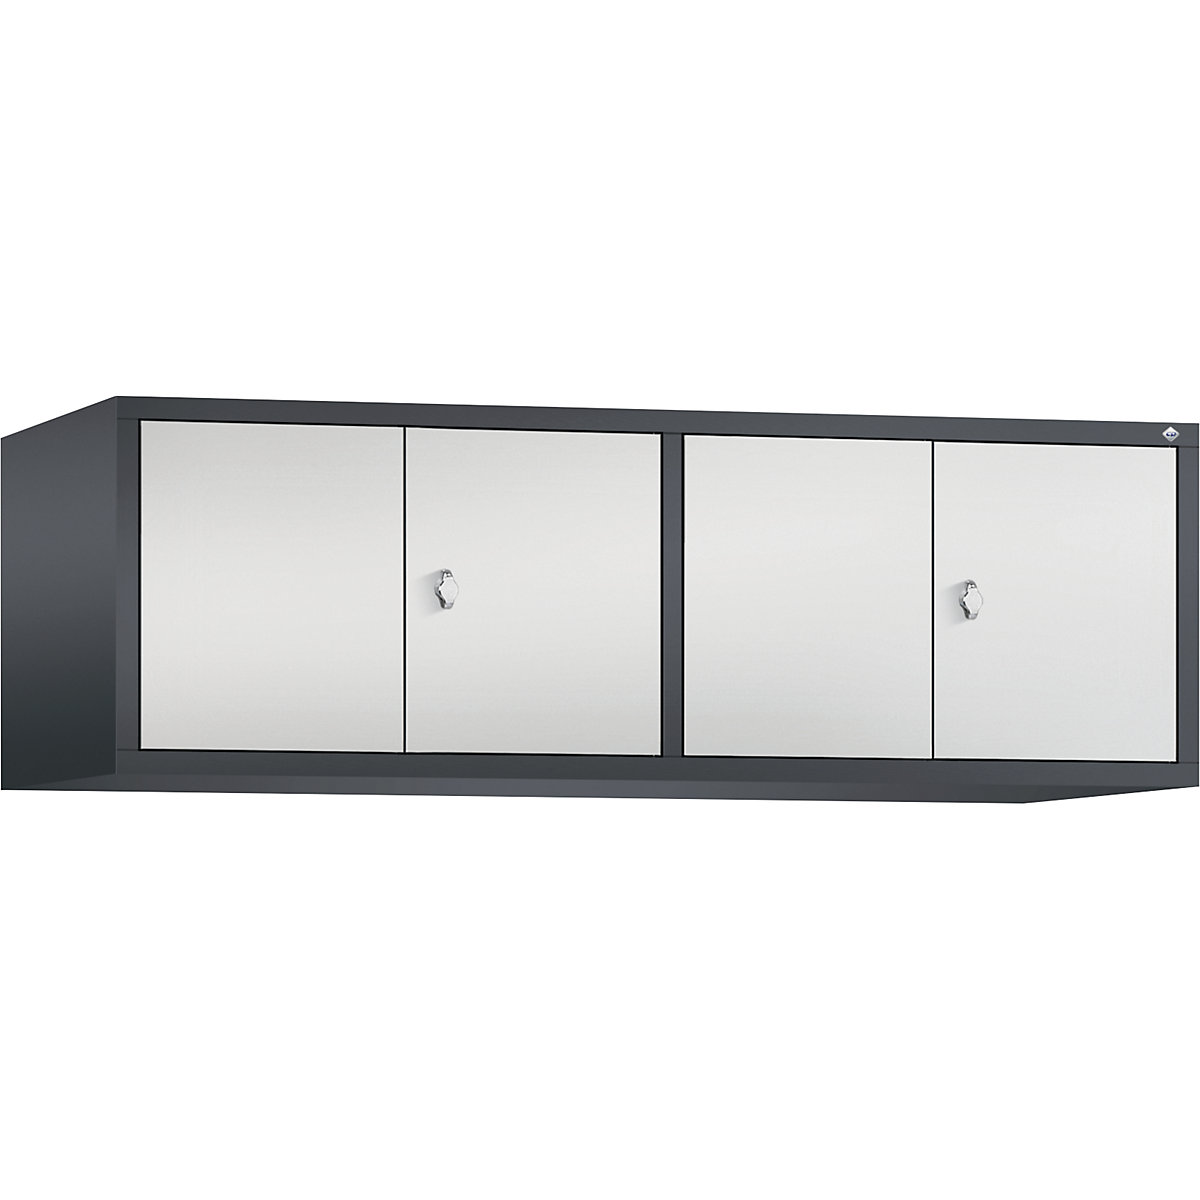 CLASSIC add-on cupboard, doors close in the middle – C+P, 4 compartments, compartment width 400 mm, black grey / light grey-10